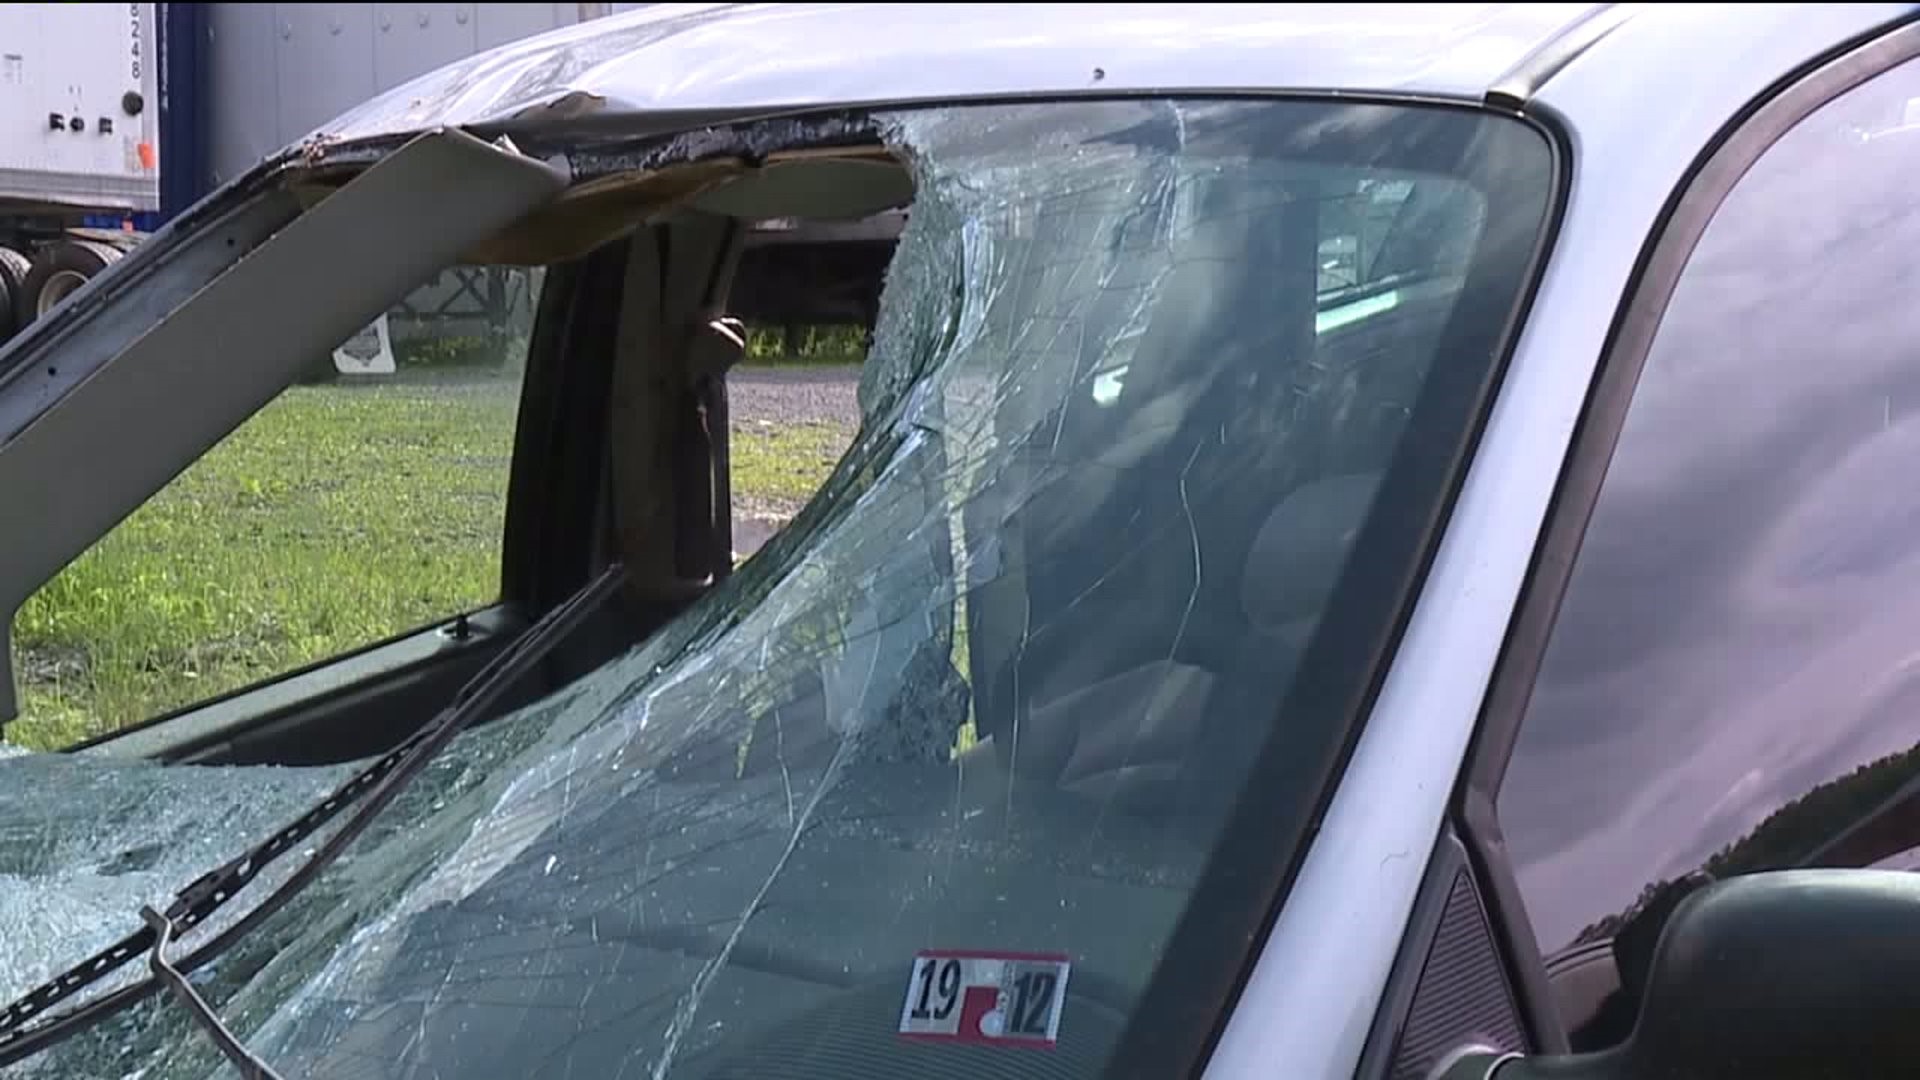 Shock, Sadness Over Tragic `Freak Accident` After Deer Smashes Through Windshield